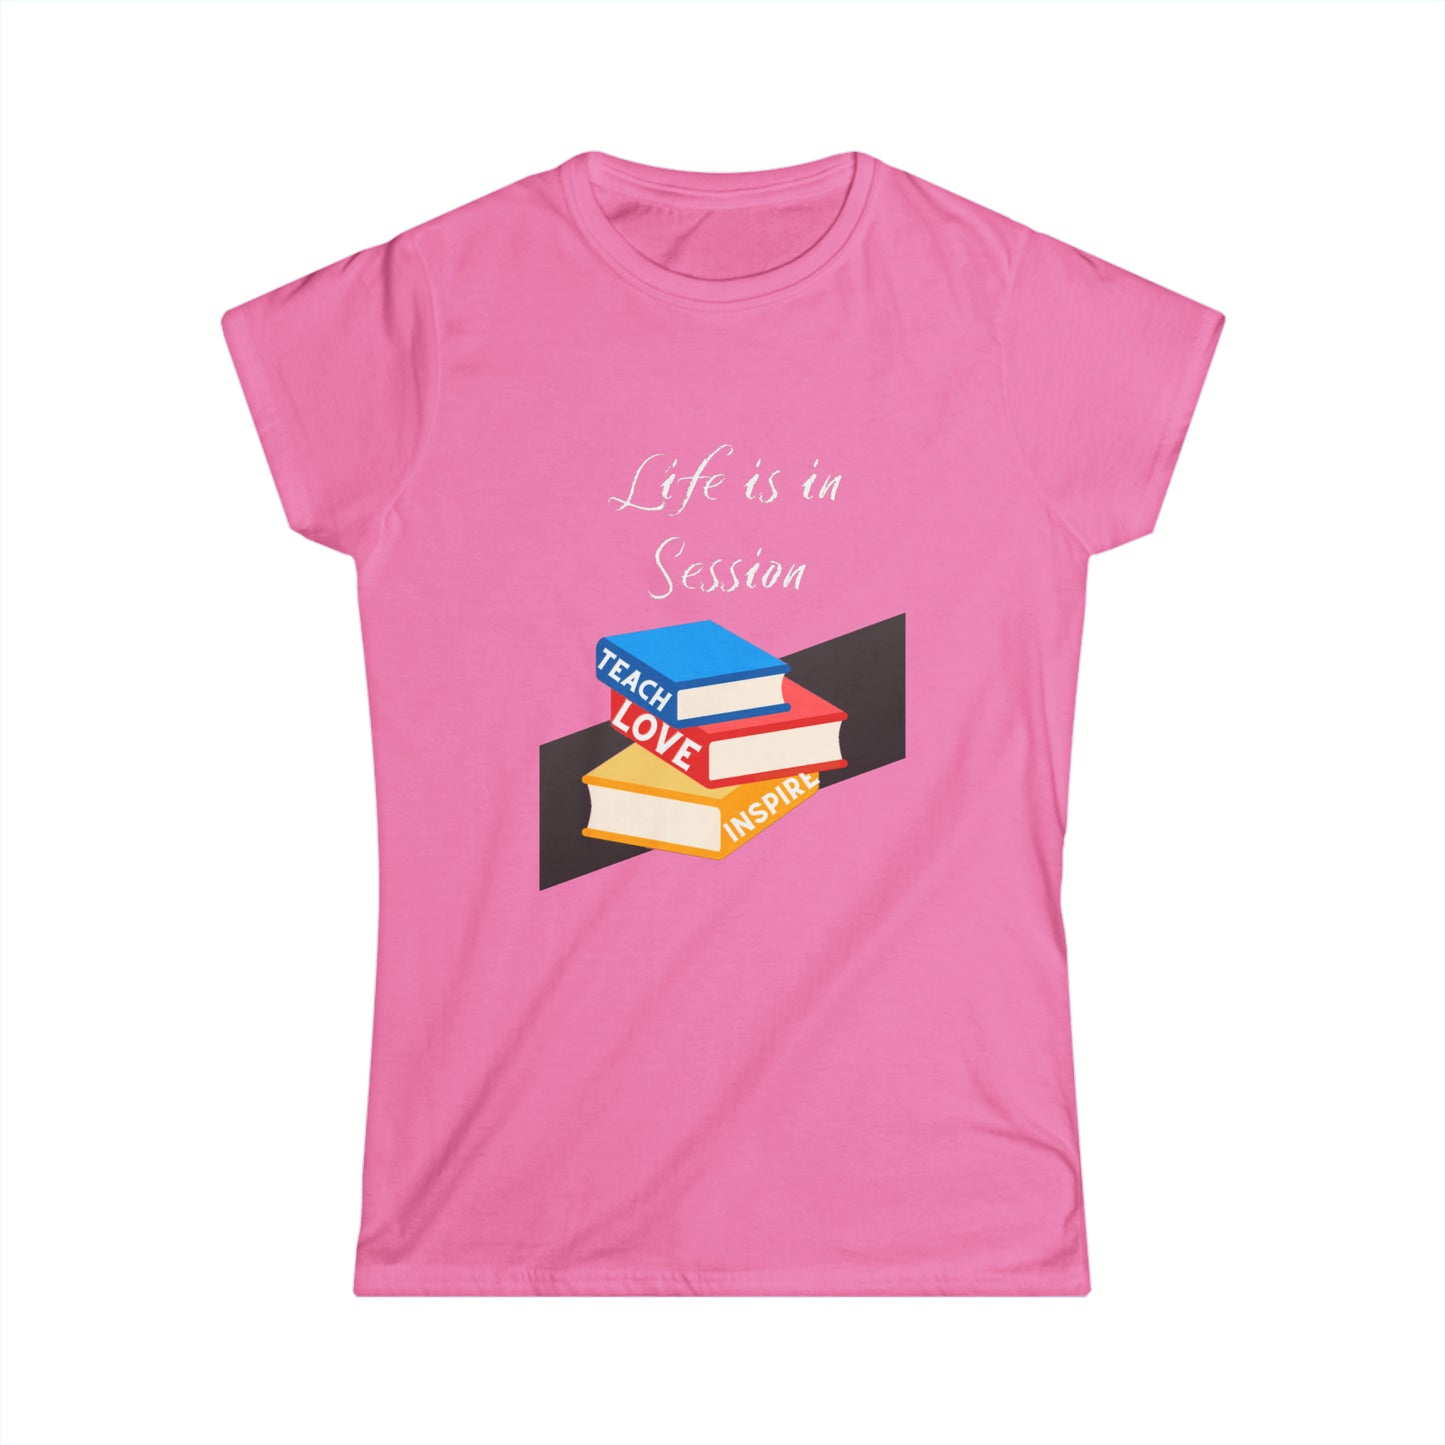 Life is in Session Women's Softstyle Tee